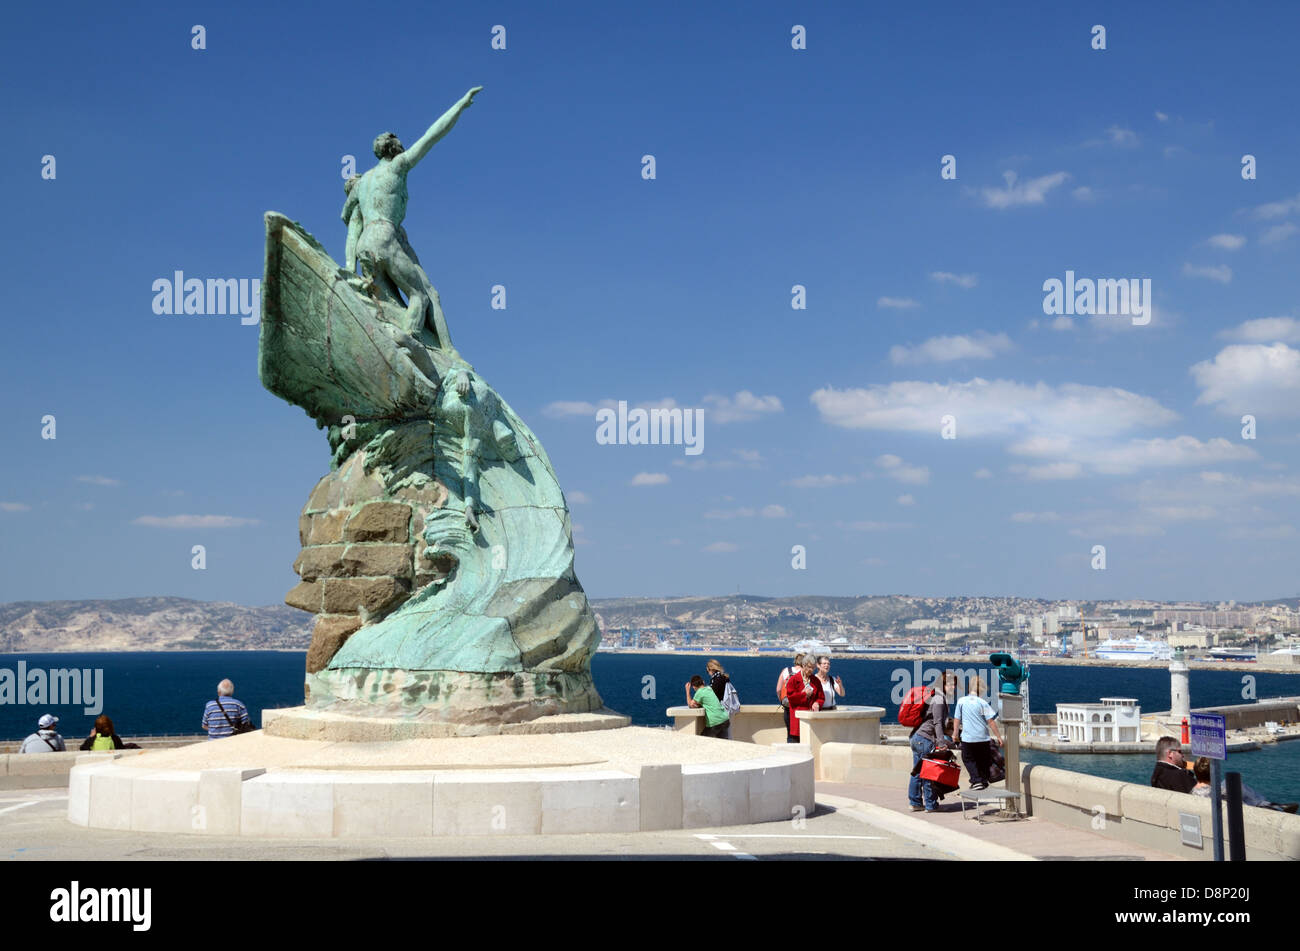 Sailors Monument or Memorial in Palais du Pharo or Pharo Palace Gardens overlooking the Vieux Port or Old Port Marseille Provence France Stock Photo